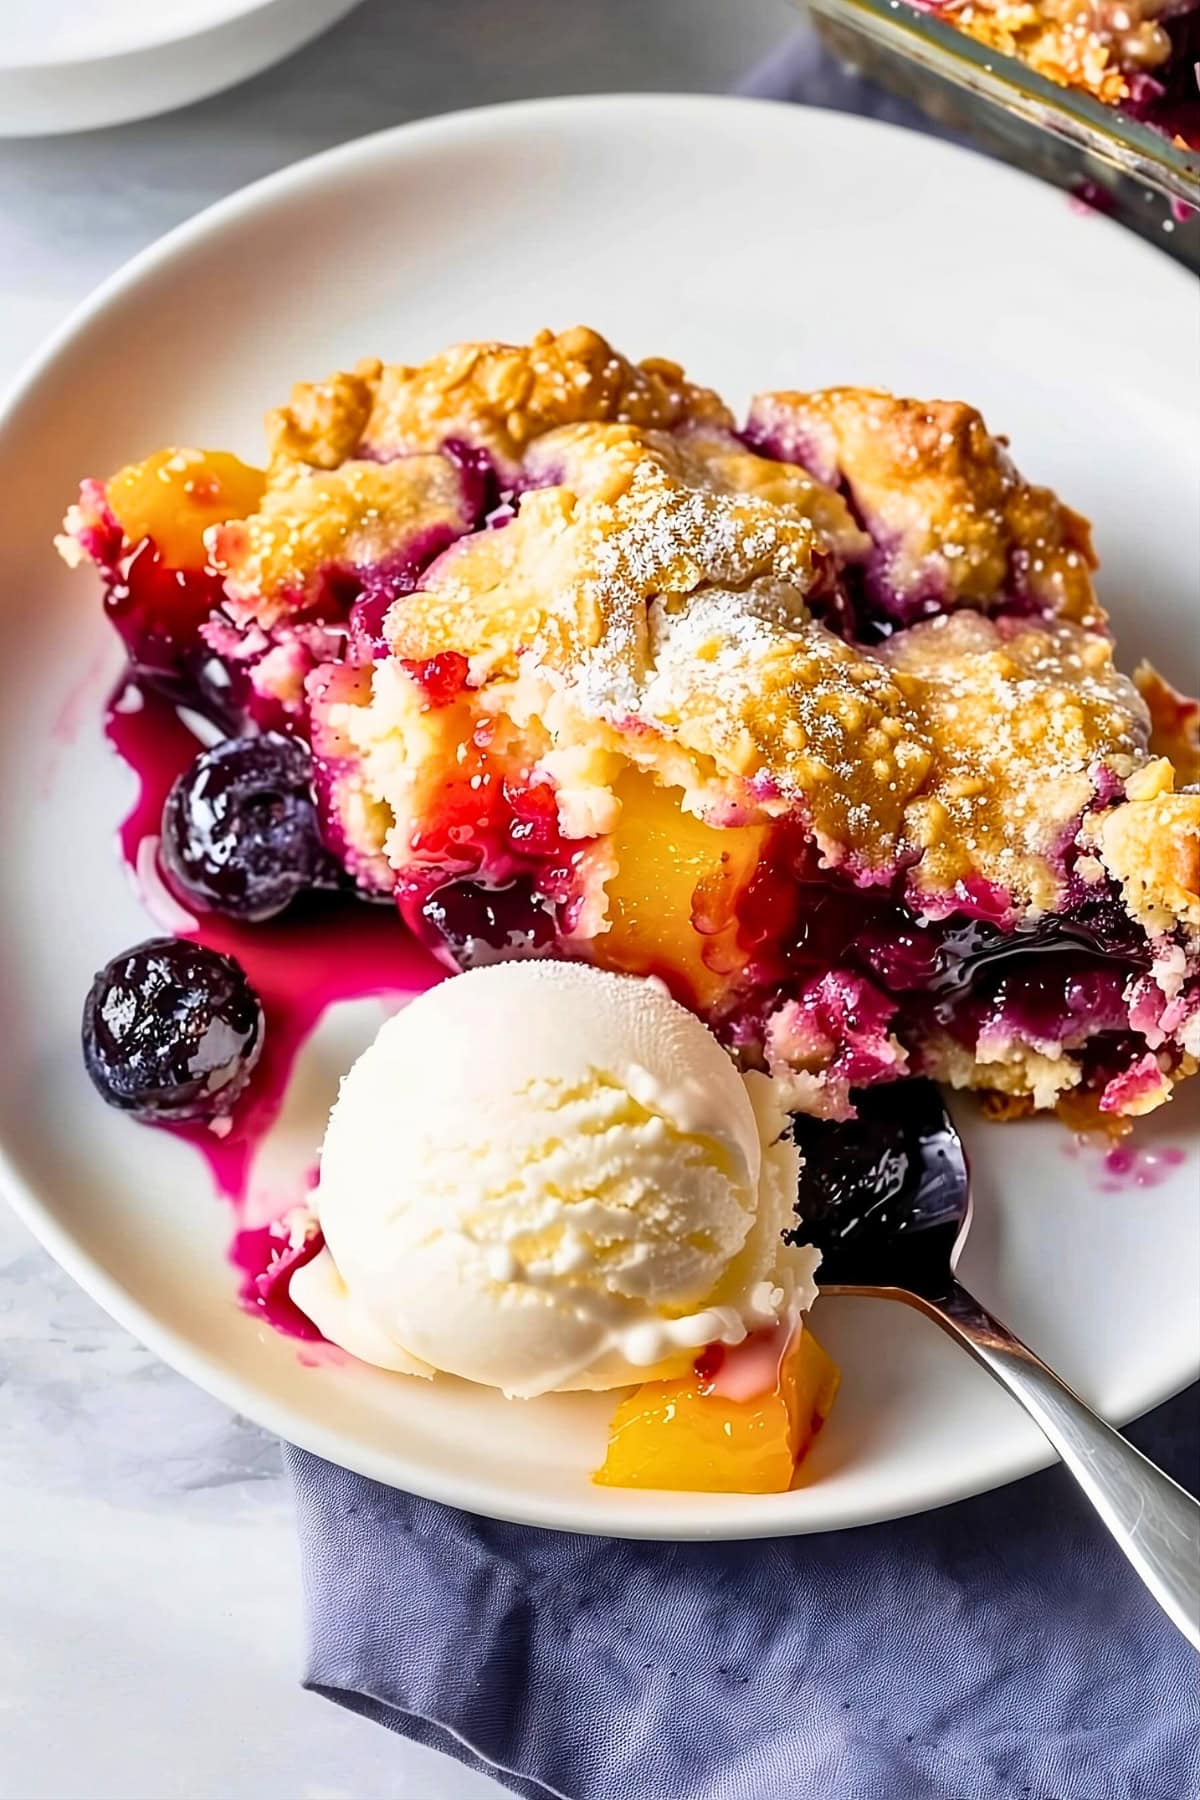 Peach and blueberry cobbler serving with vanilla ice cream in plate.